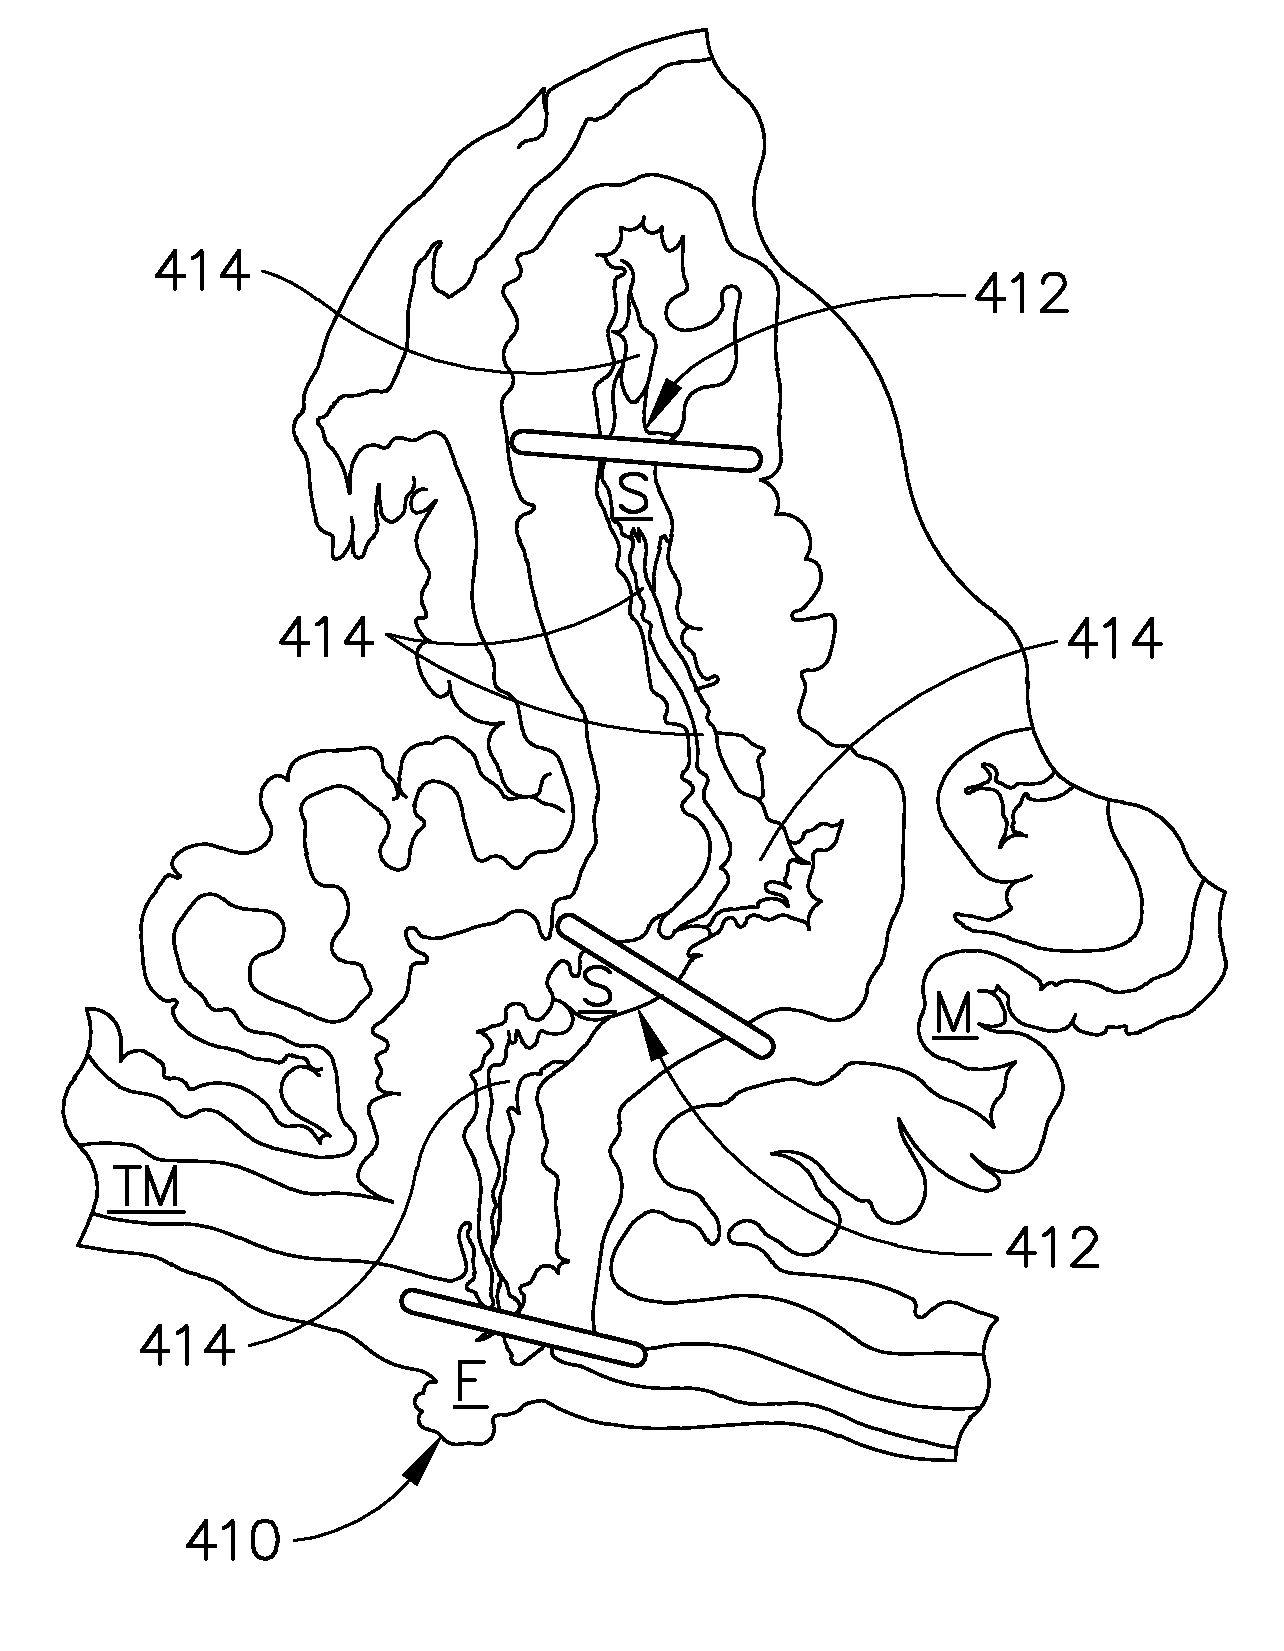 Methods of forming a laparoscopic greater curvature plication using a surgical stapler